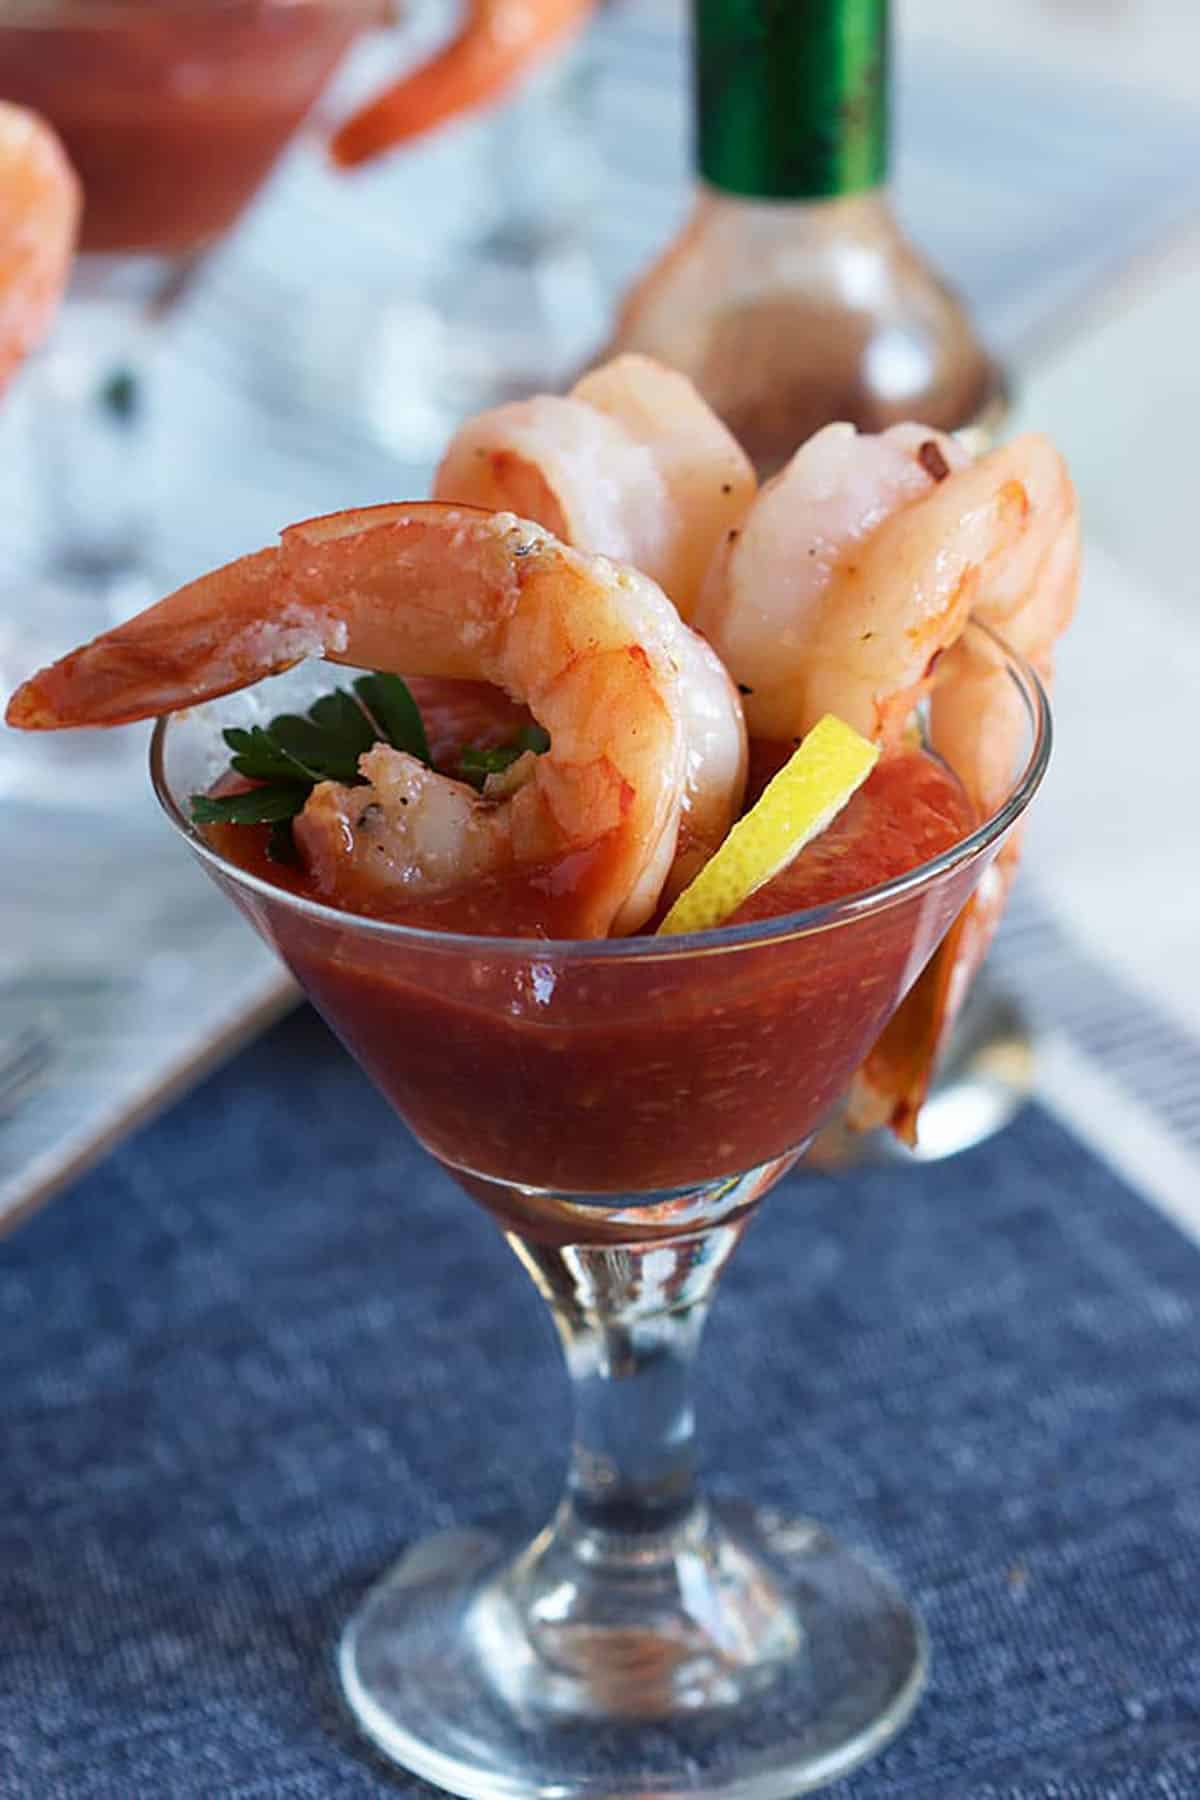 Shrimp are being dunked into cocktail sauce. 